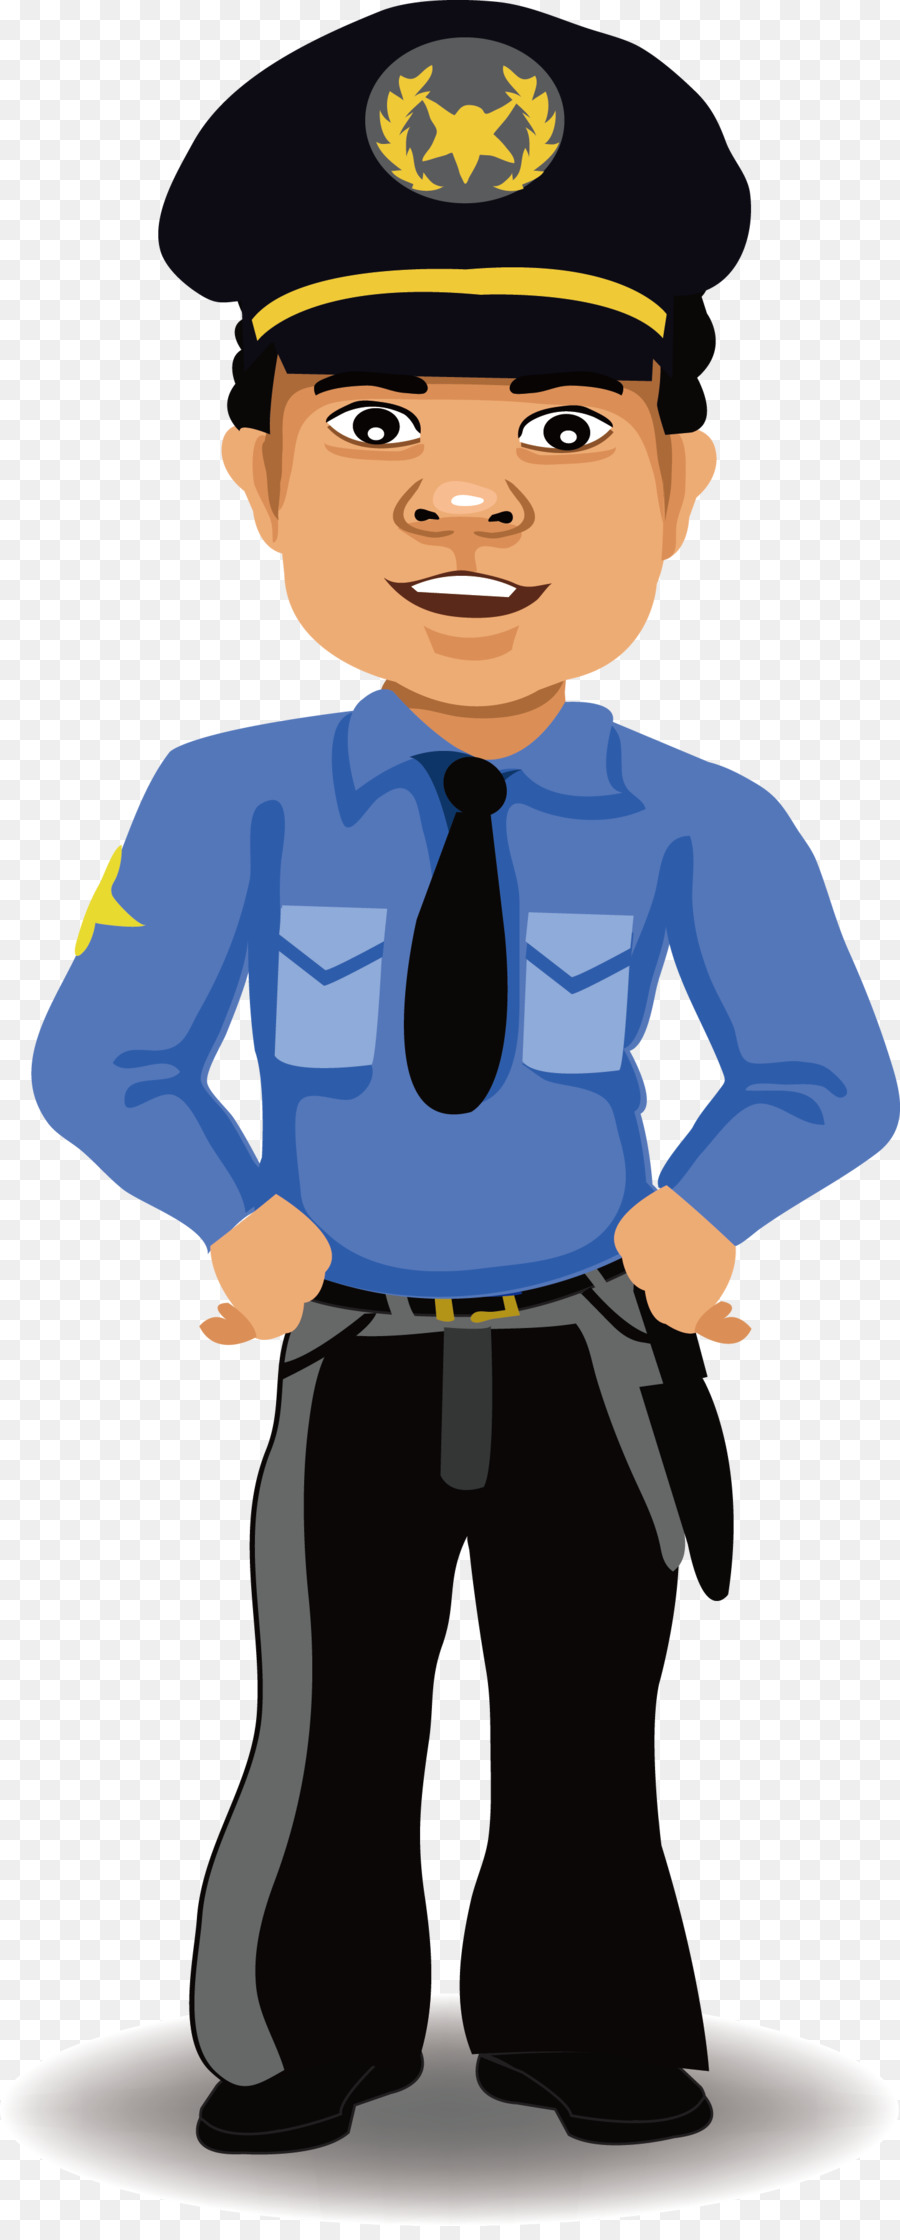 Police officer Cartoon Security - People's Police Vector ...